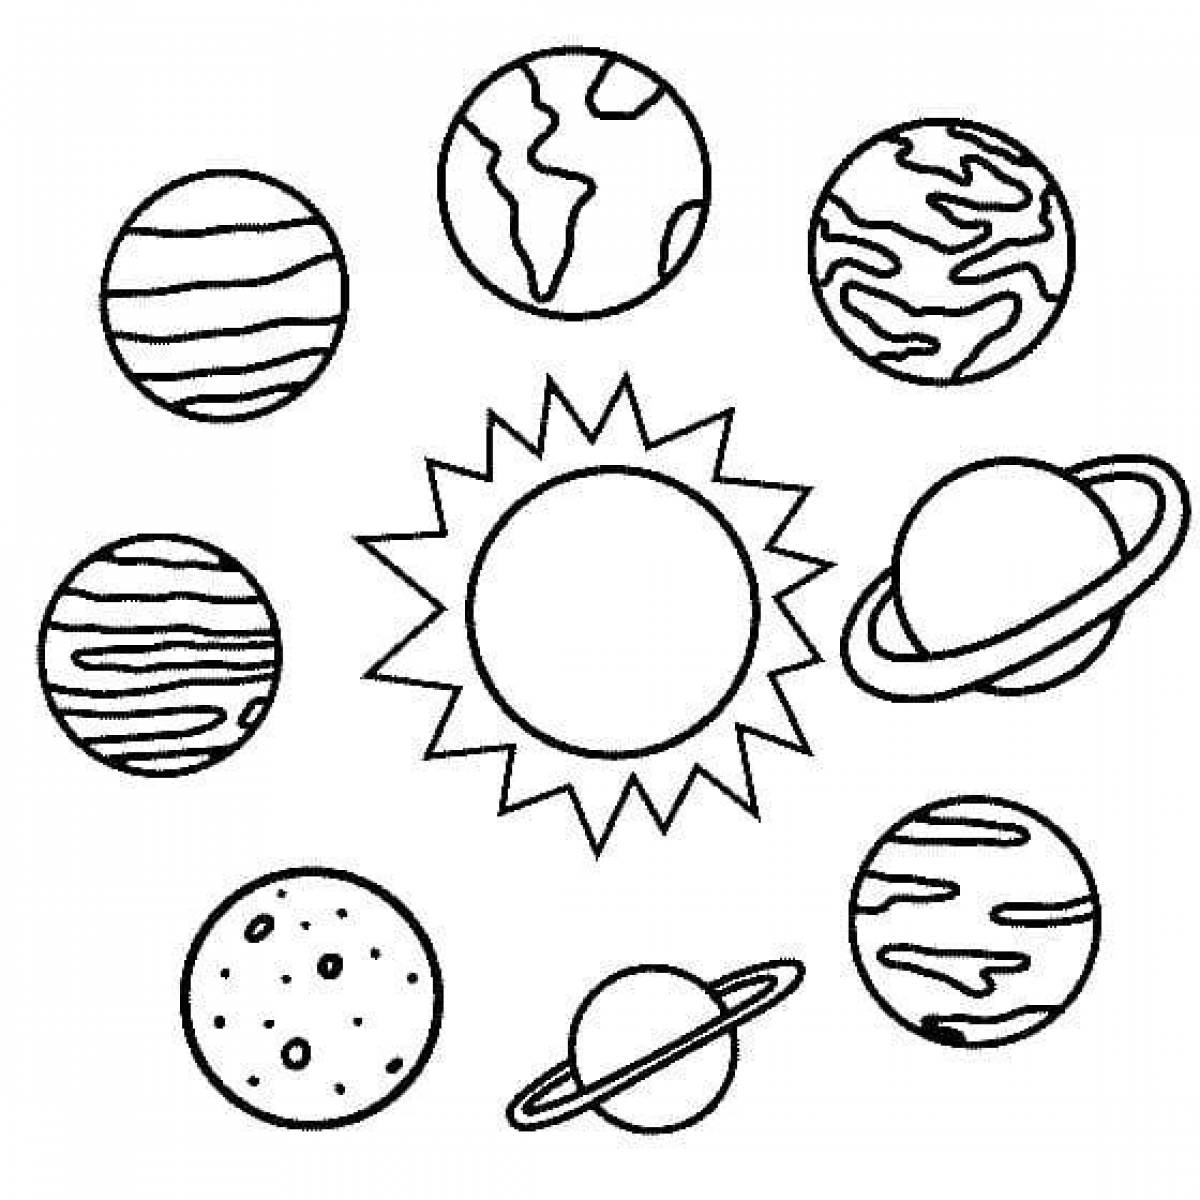 Colorful planet coloring for kids